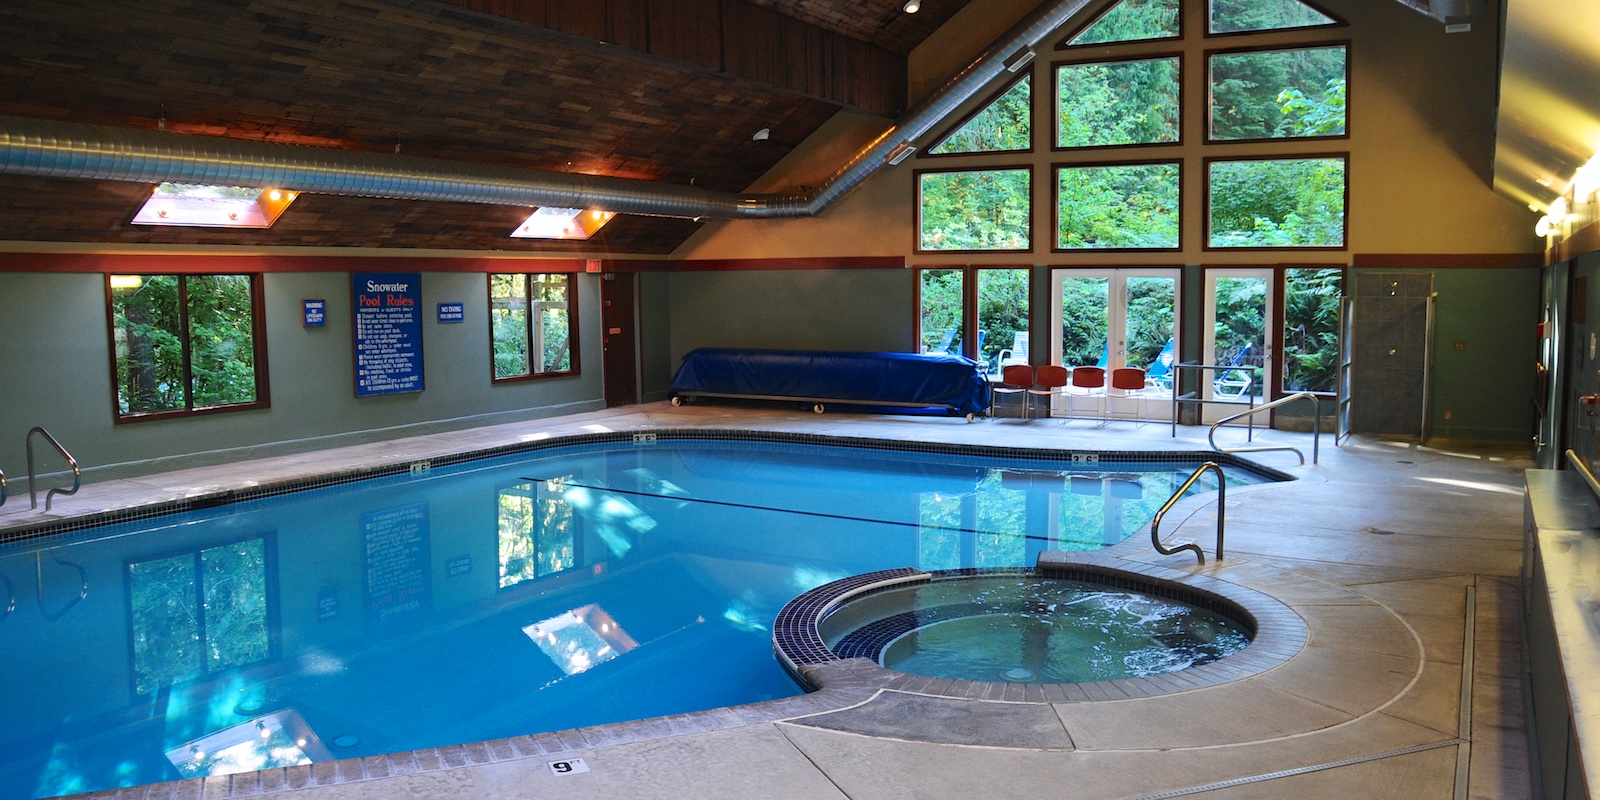 Clubhouse Pool and Hot tub feel good after skiing